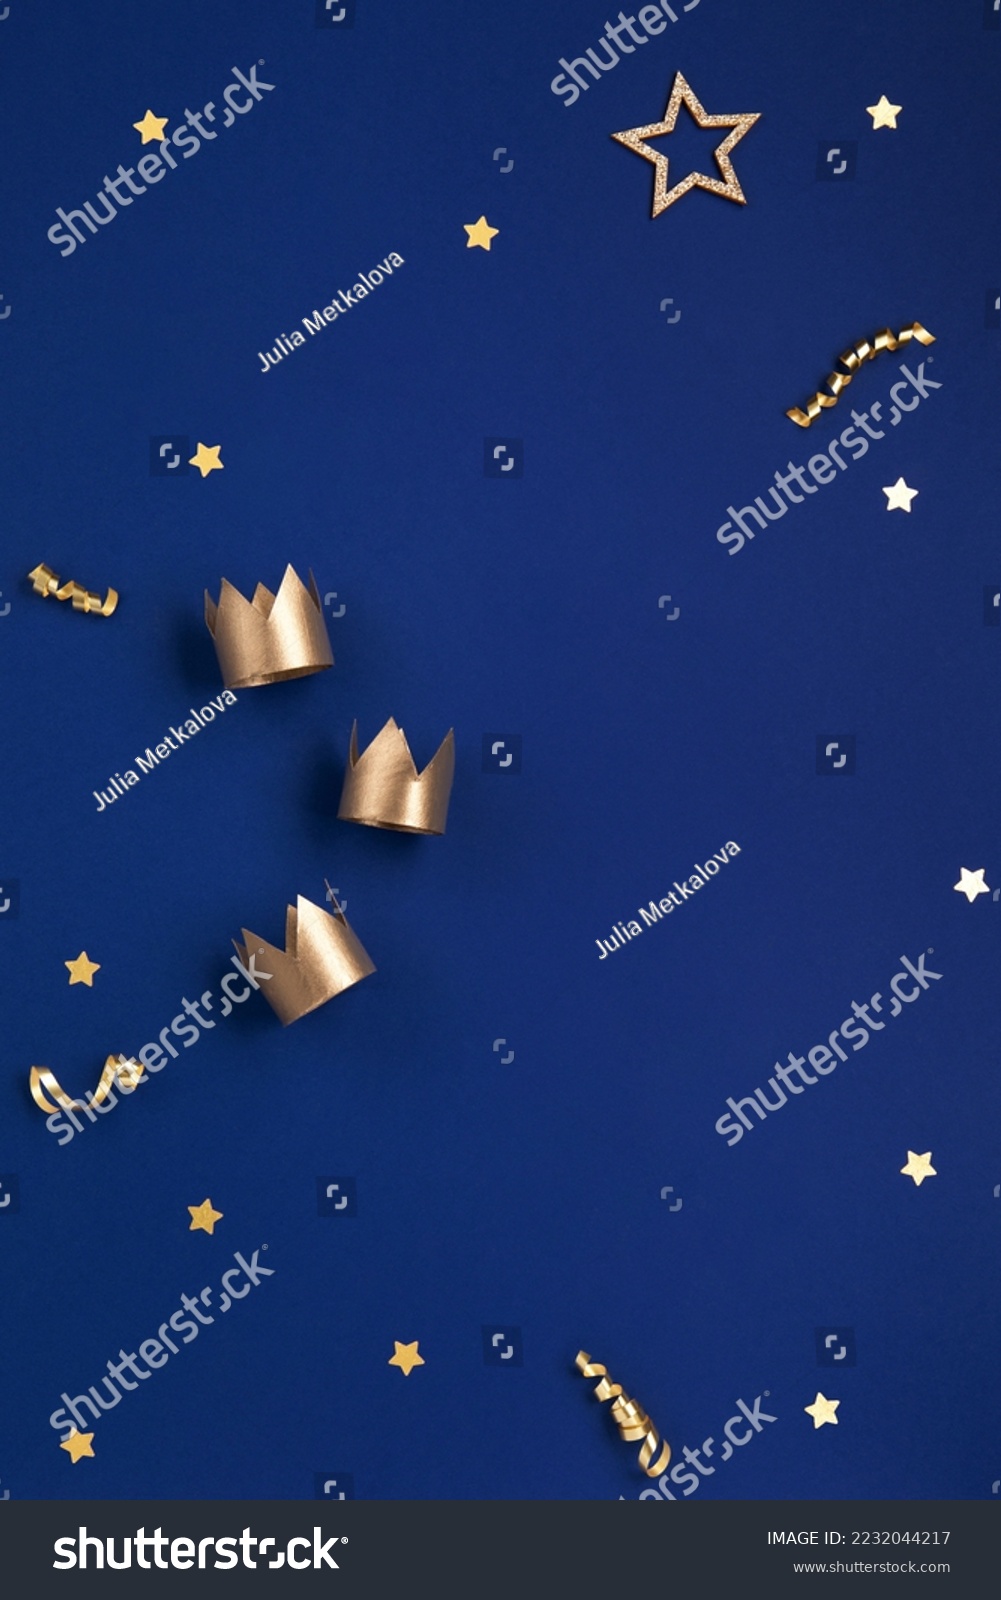 Traditional Three King's Day of January 6. Three gold crowns on blue background. Concept for Dia de Reyes Magos day, three Wise Men. Happy Epiphany day. Top view, copy space, flat lay. #2232044217